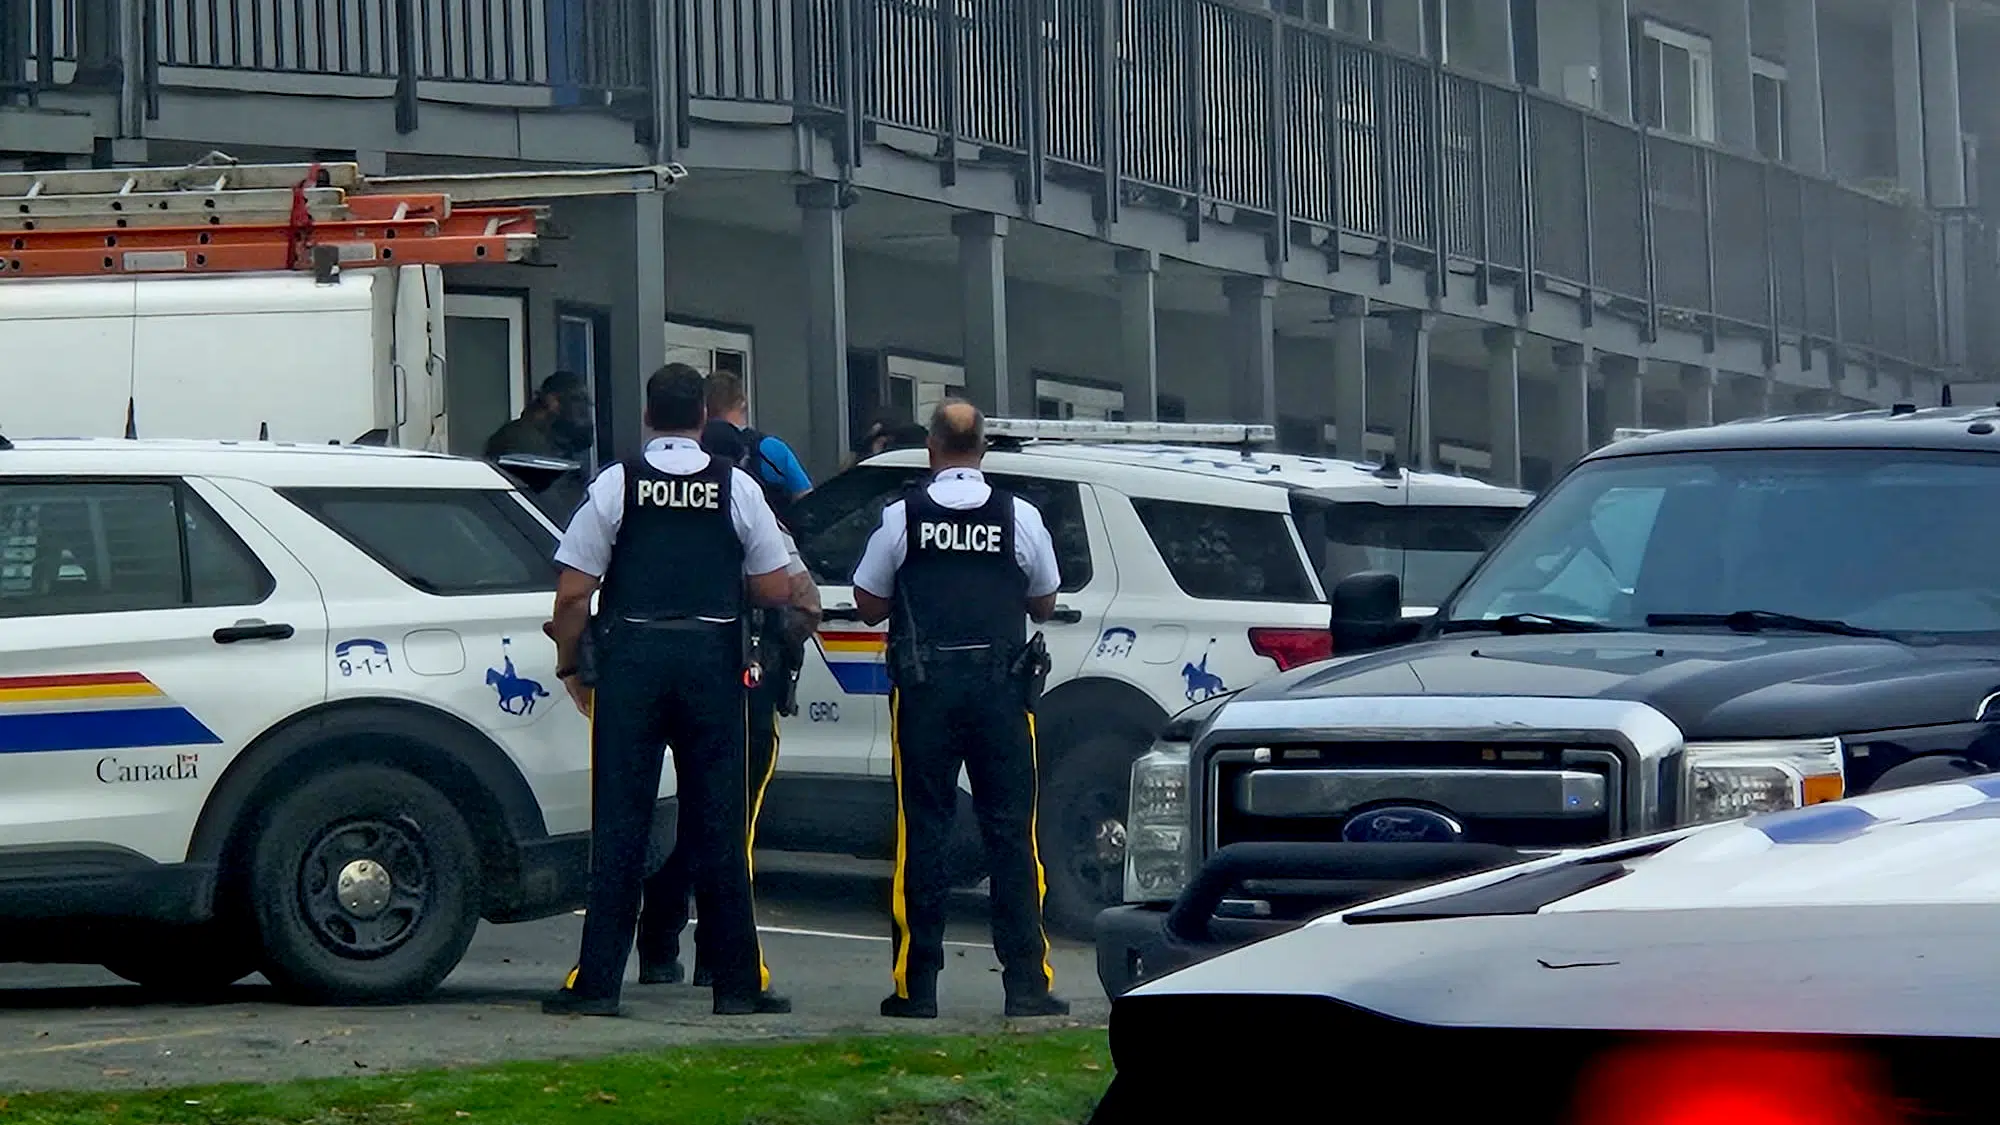 VIDEO: Mental health crisis at Nanaimo motel closes traffic on Terminal Ave., one man arrested